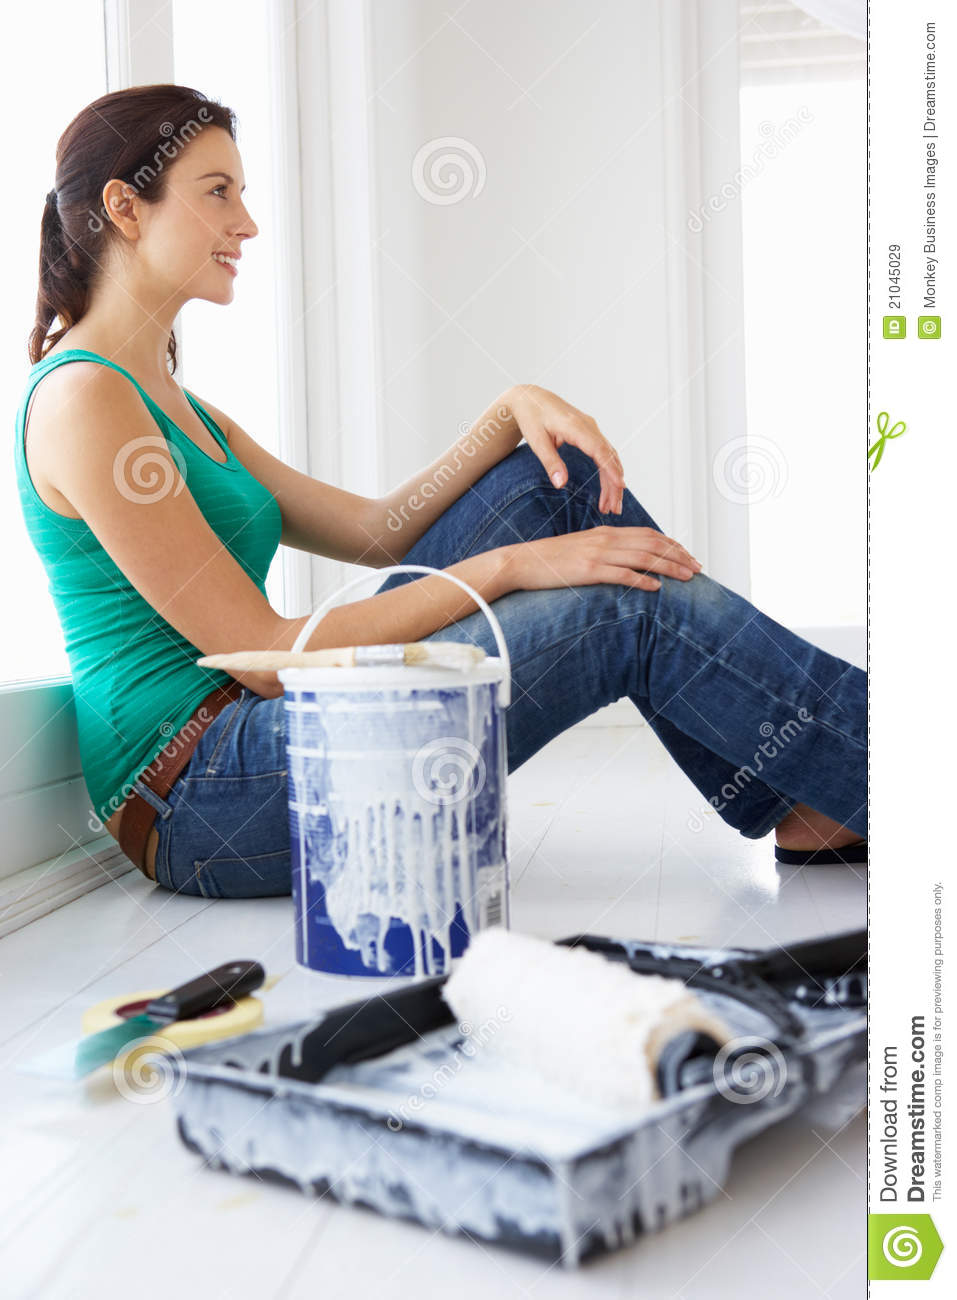 Woman Painting House Royalty Free Stock Images   Image  21045029